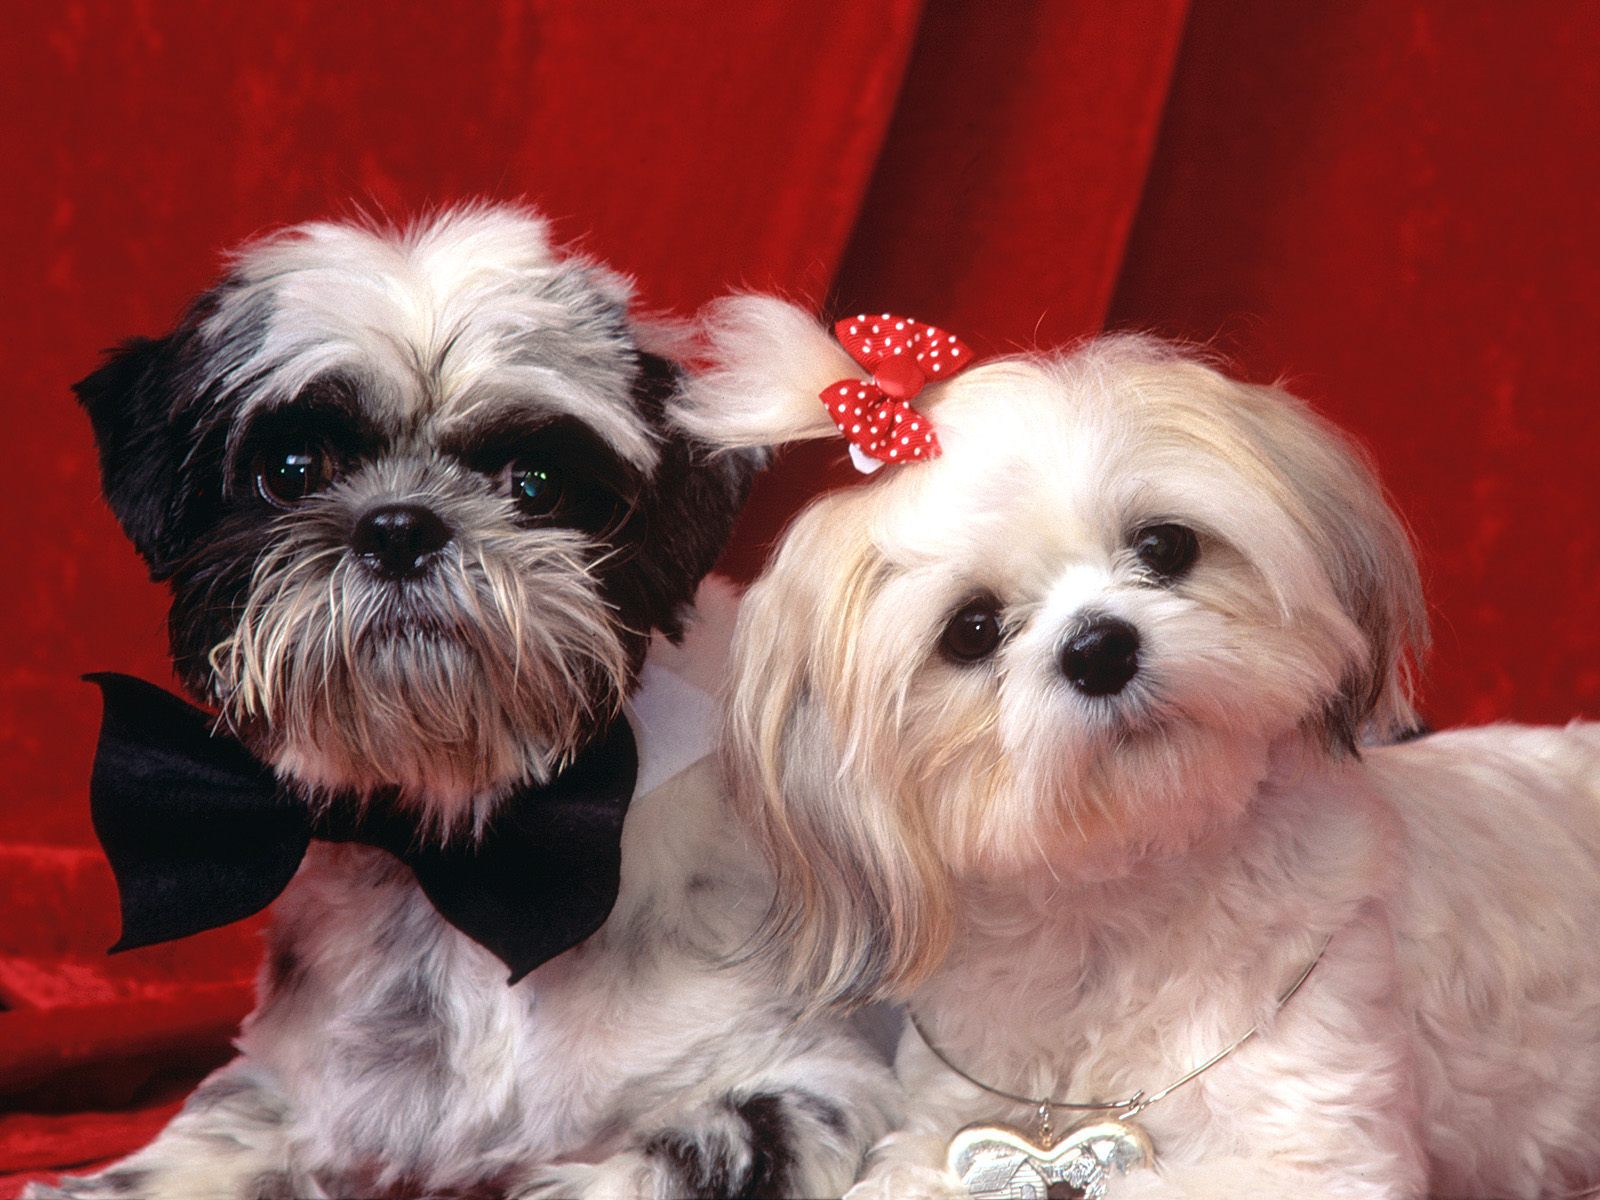 Pair of shih tzu on a red background wallpapers and images ...